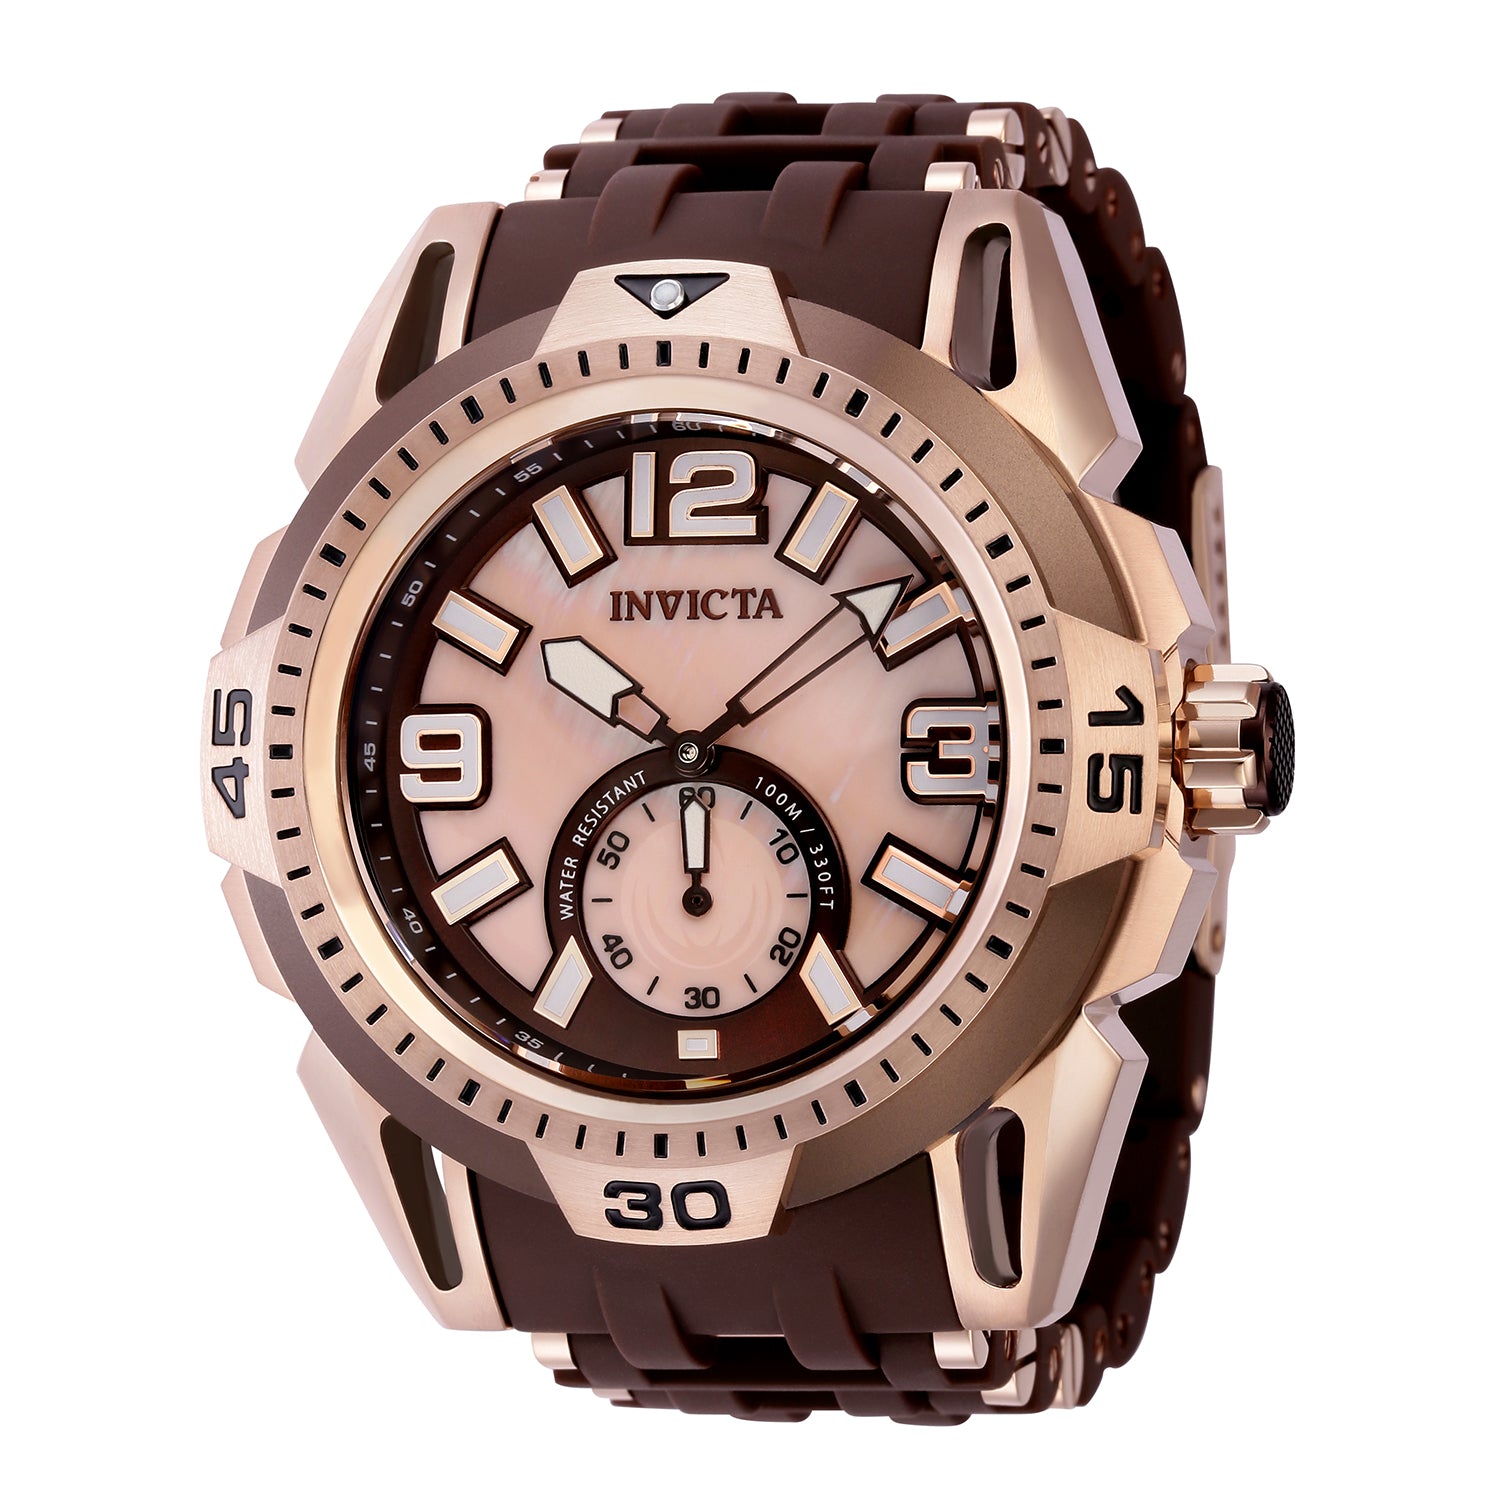 title:Invicta Men's IN-43841 52mm Pink Mother-of-Pearl Dial Quartz Watch;color:Brown